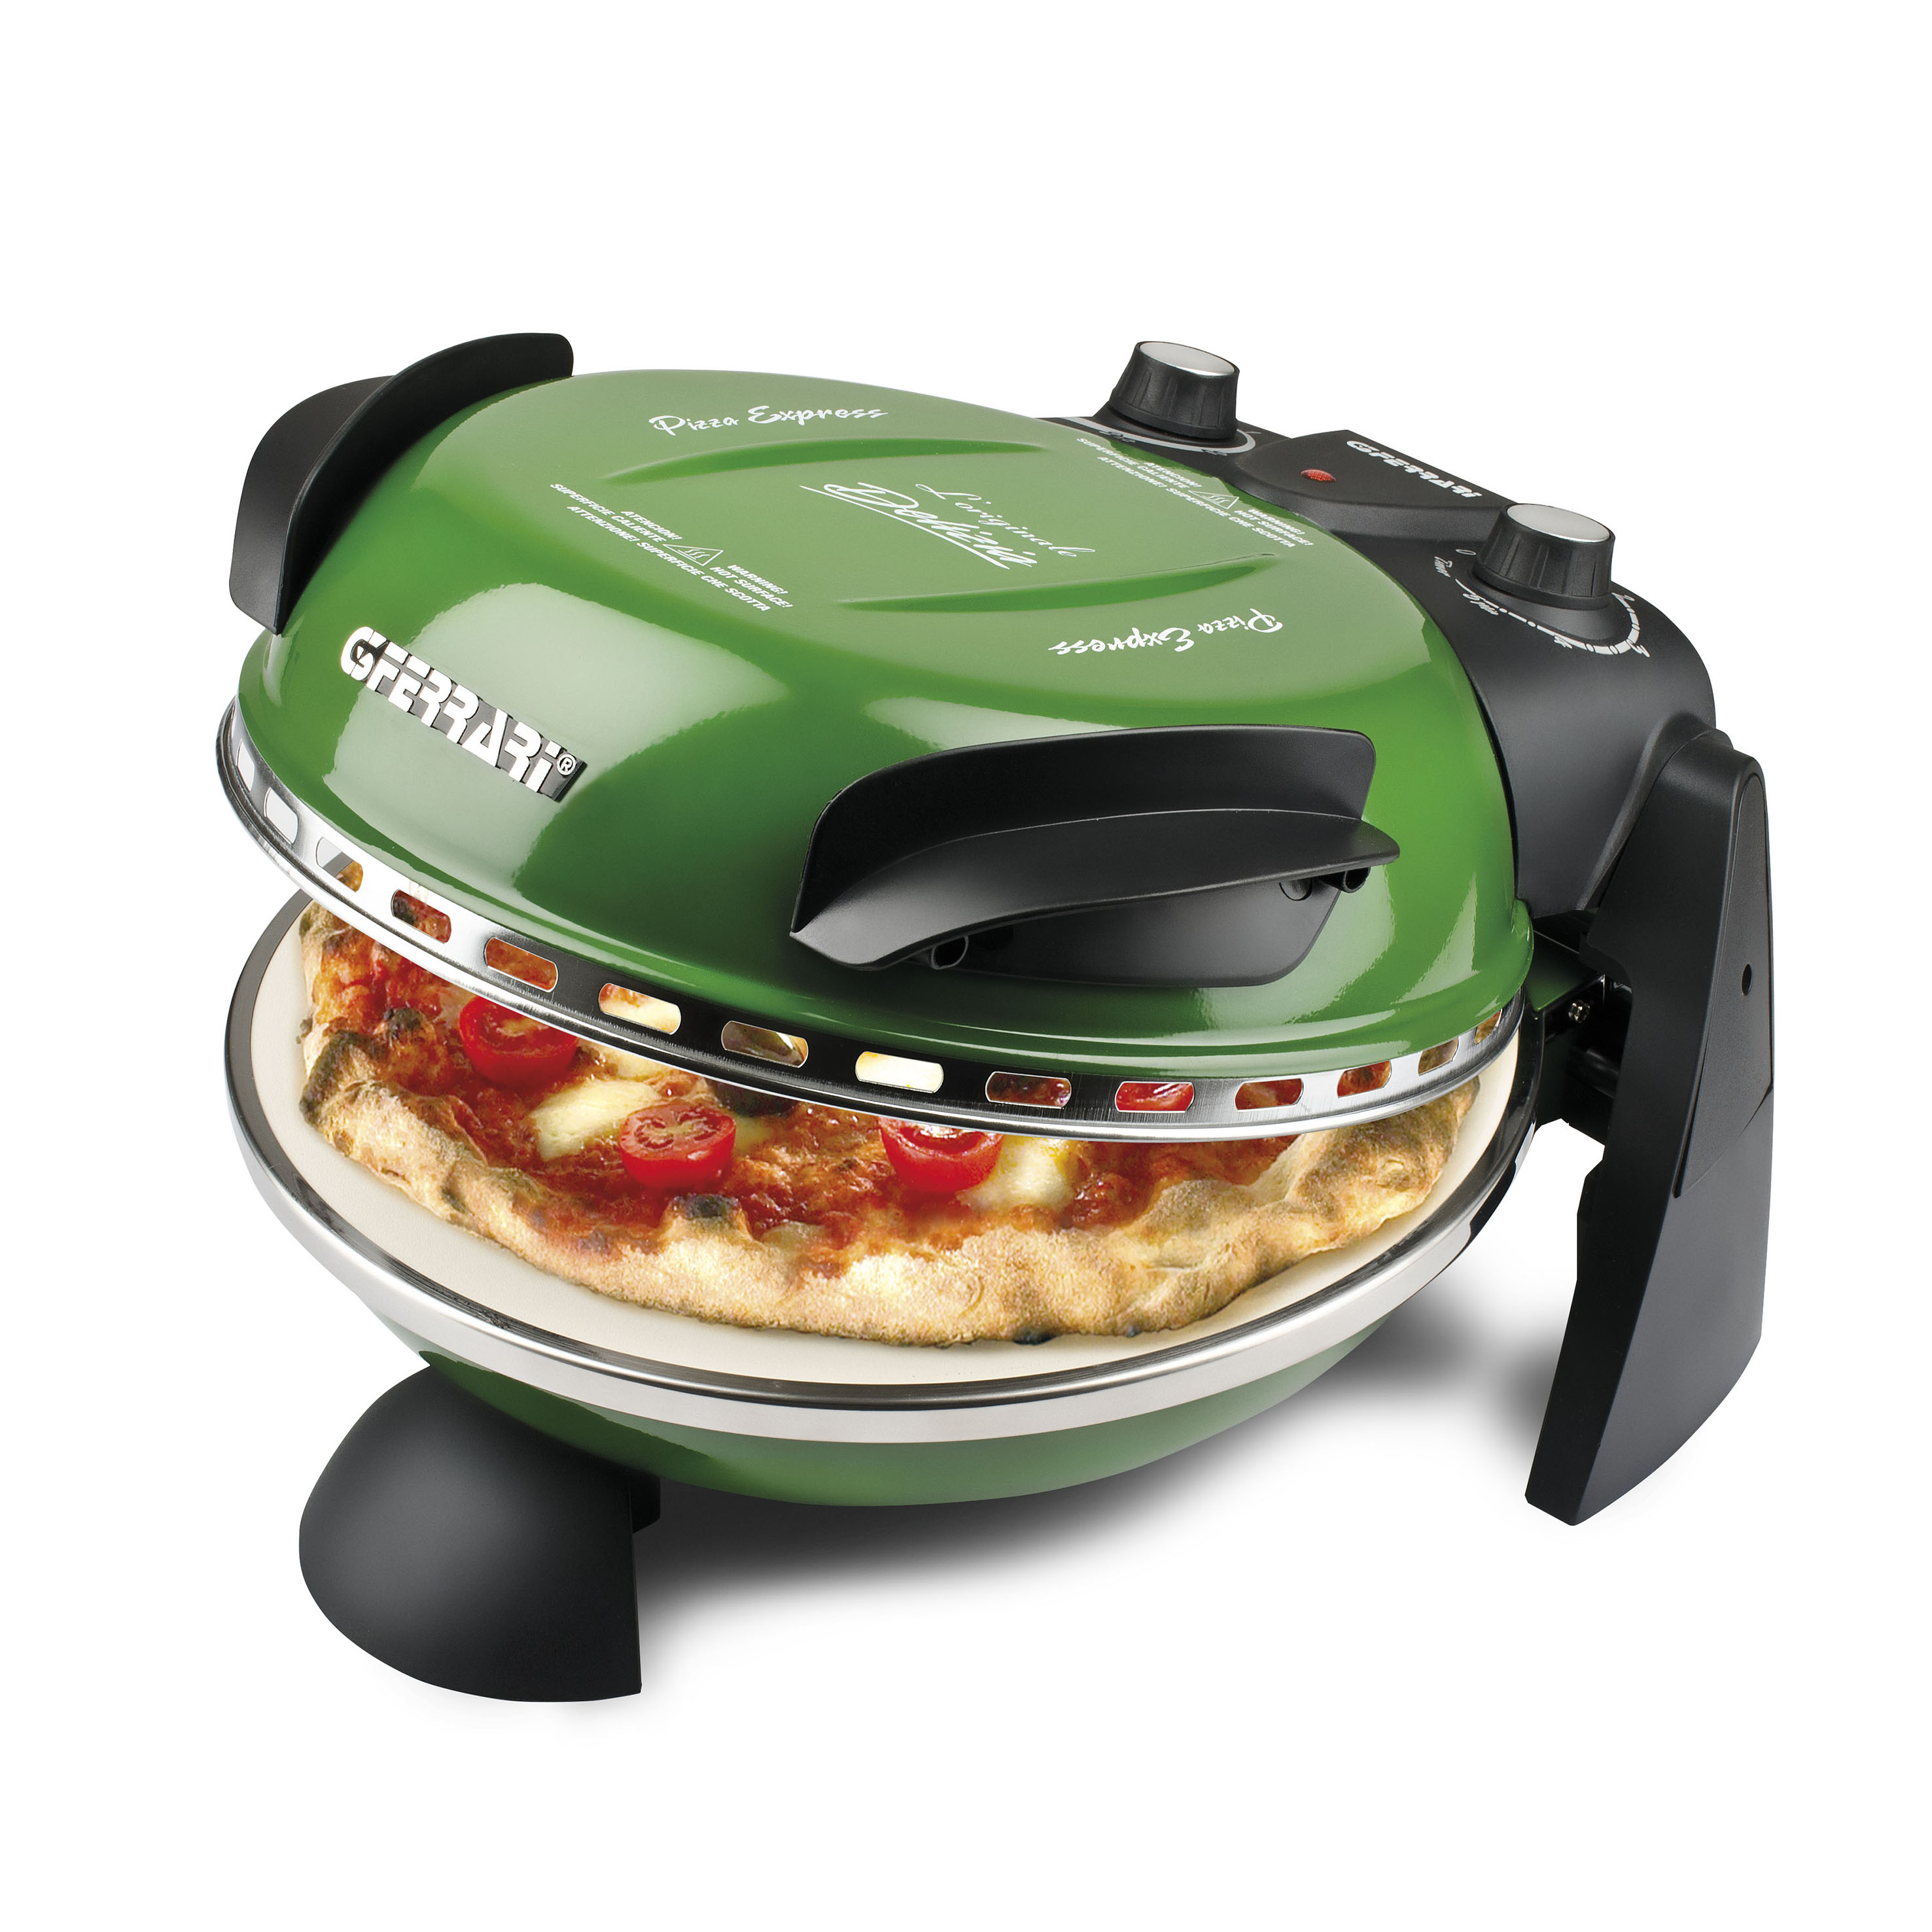 G1000603, Delizia, pizza oven, 1200W, up to 400C, green